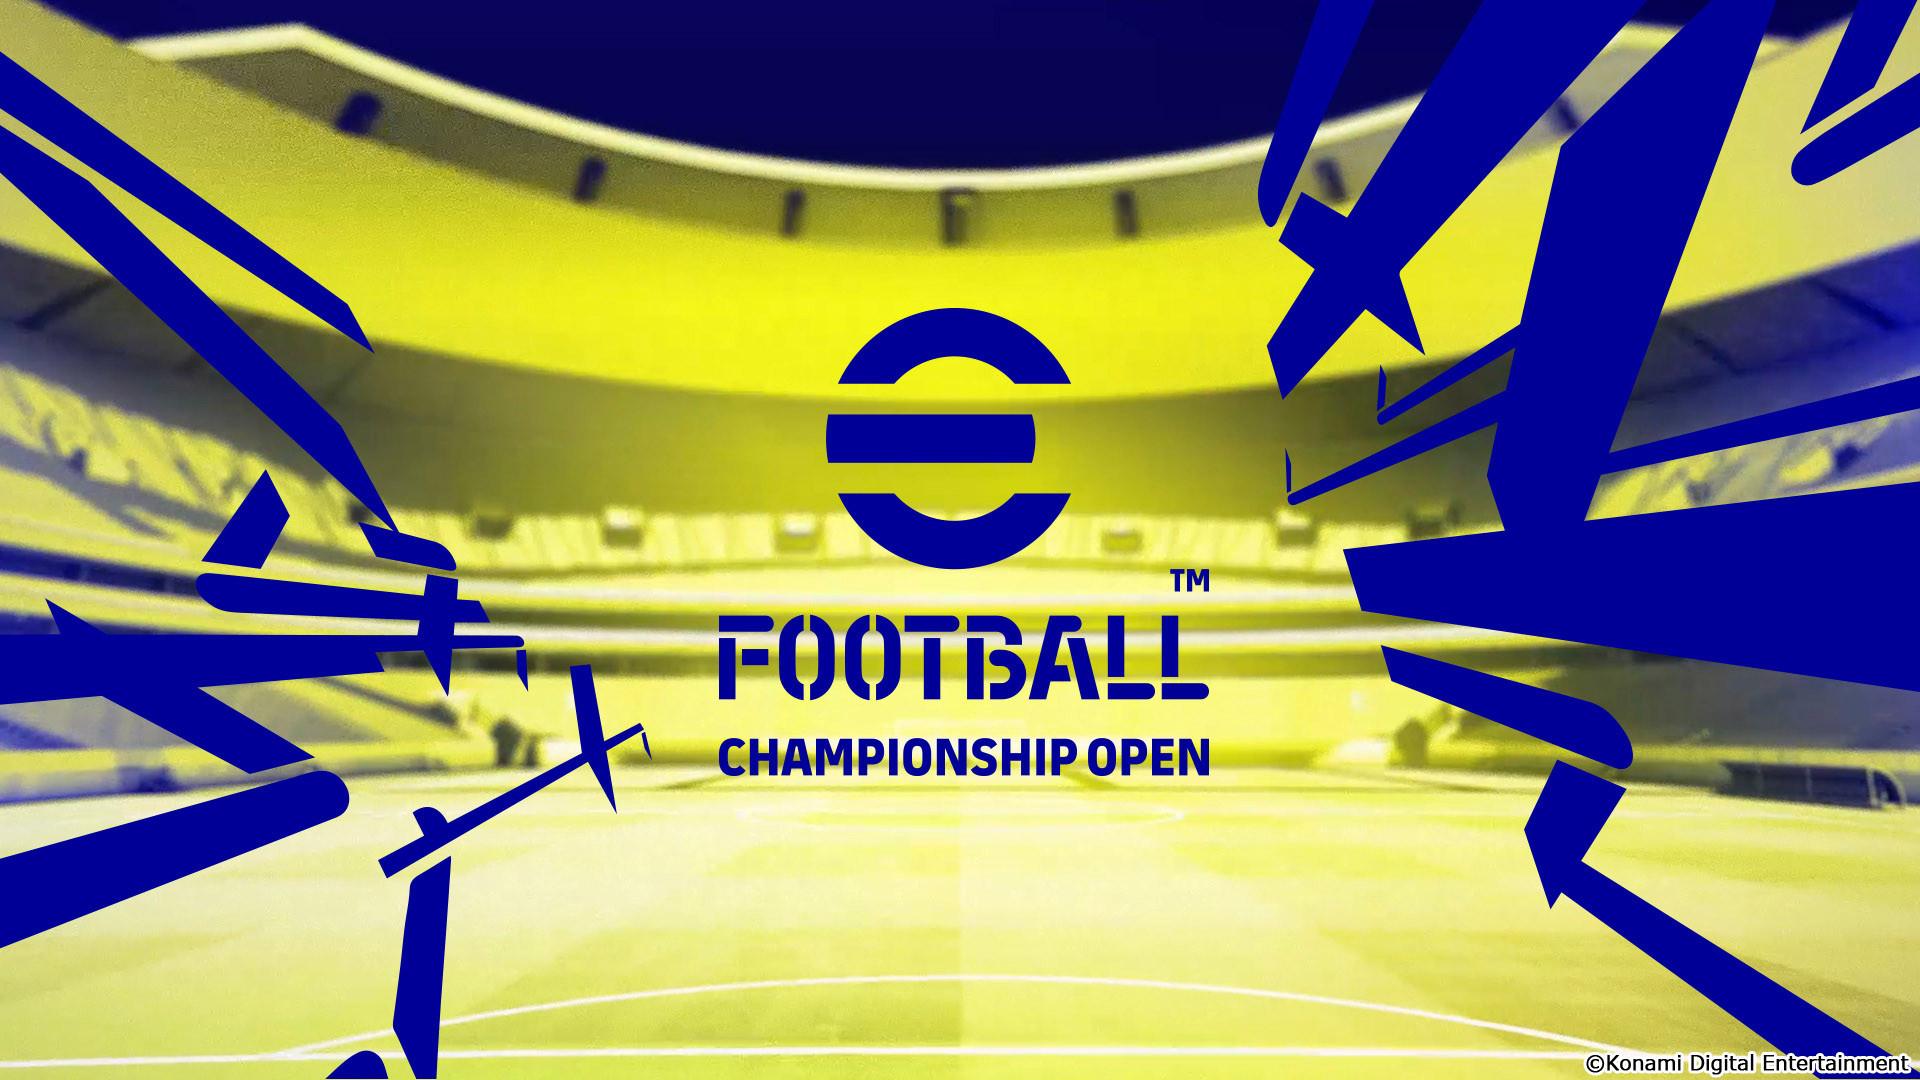 eFootball Championship Open 2022 feature image